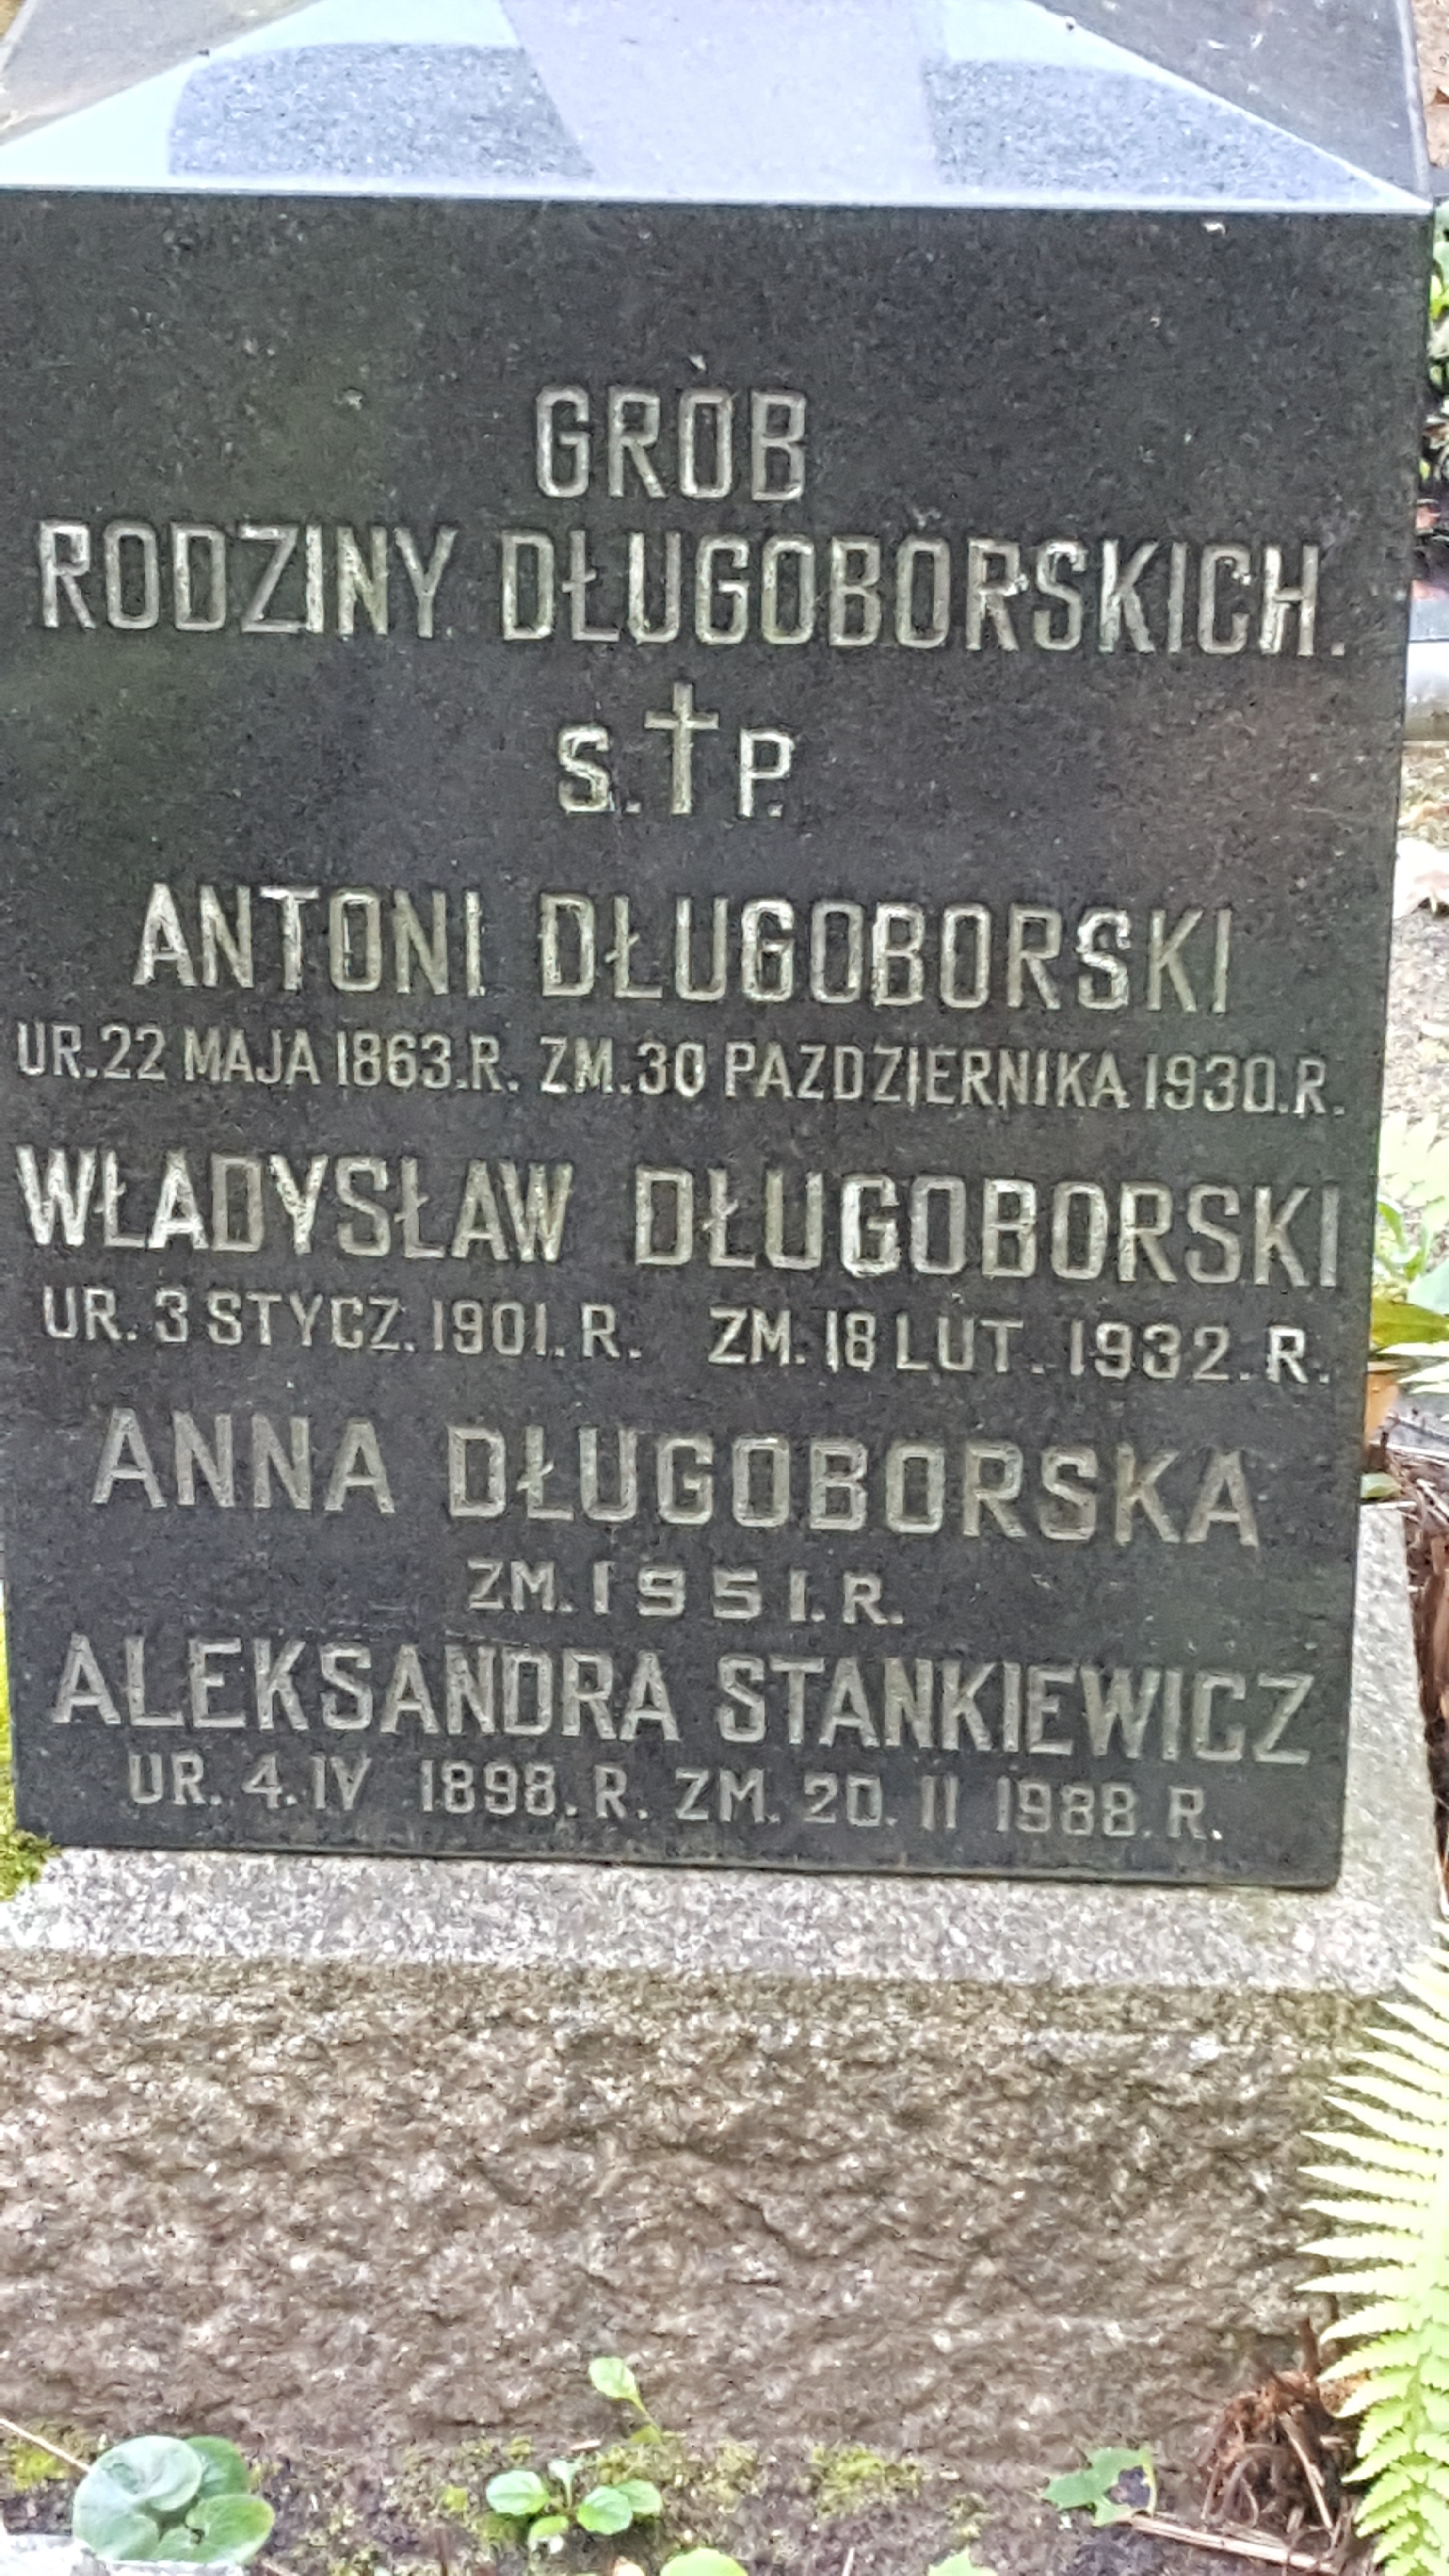 Inscription from the gravestone of the Długoborski family and Aleksandra Stankiewicz, St Michael's cemetery in Riga, as of 2021.